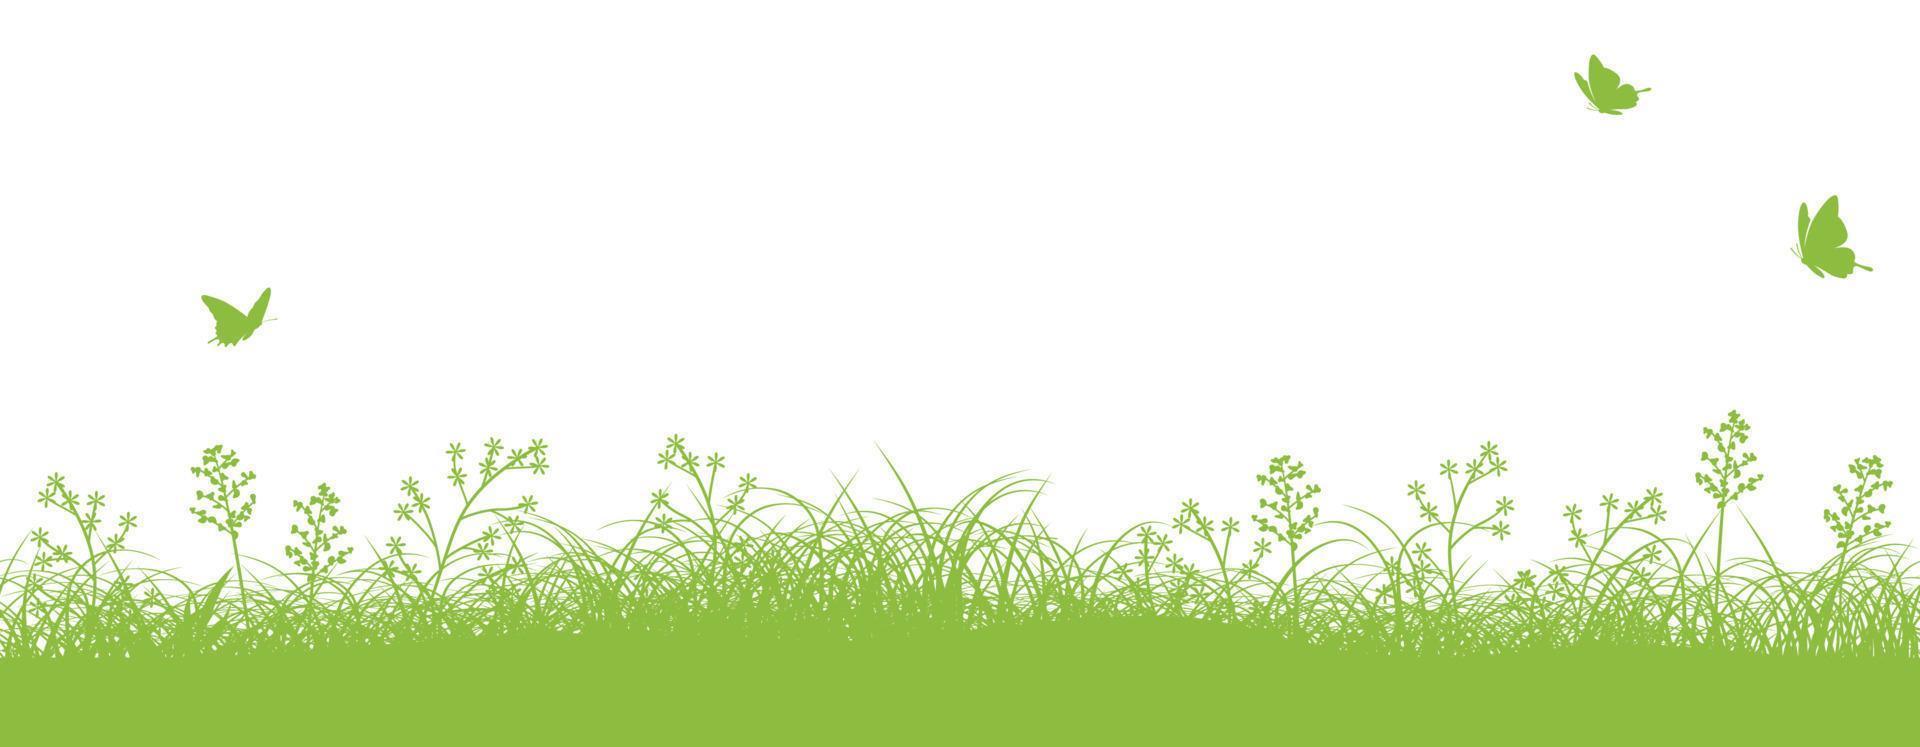 Seamless Green Grassy Field Vector Background Illustration With Text Space. Horizontally Repeatable.